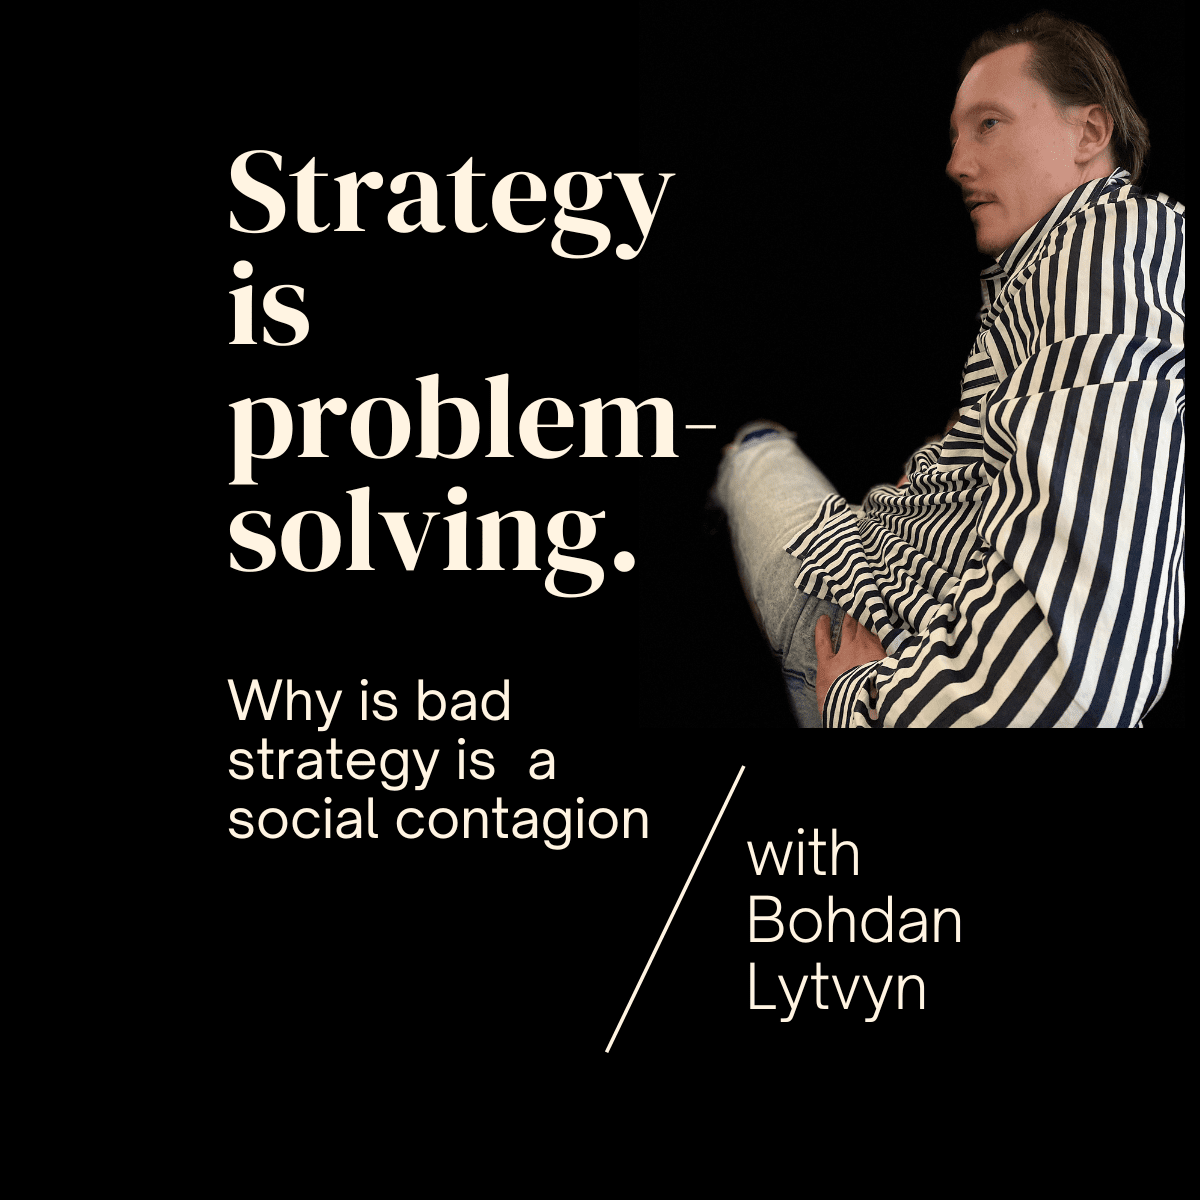 Strategy is problem-solving. Why is bad strategy in gambling a social contagion?